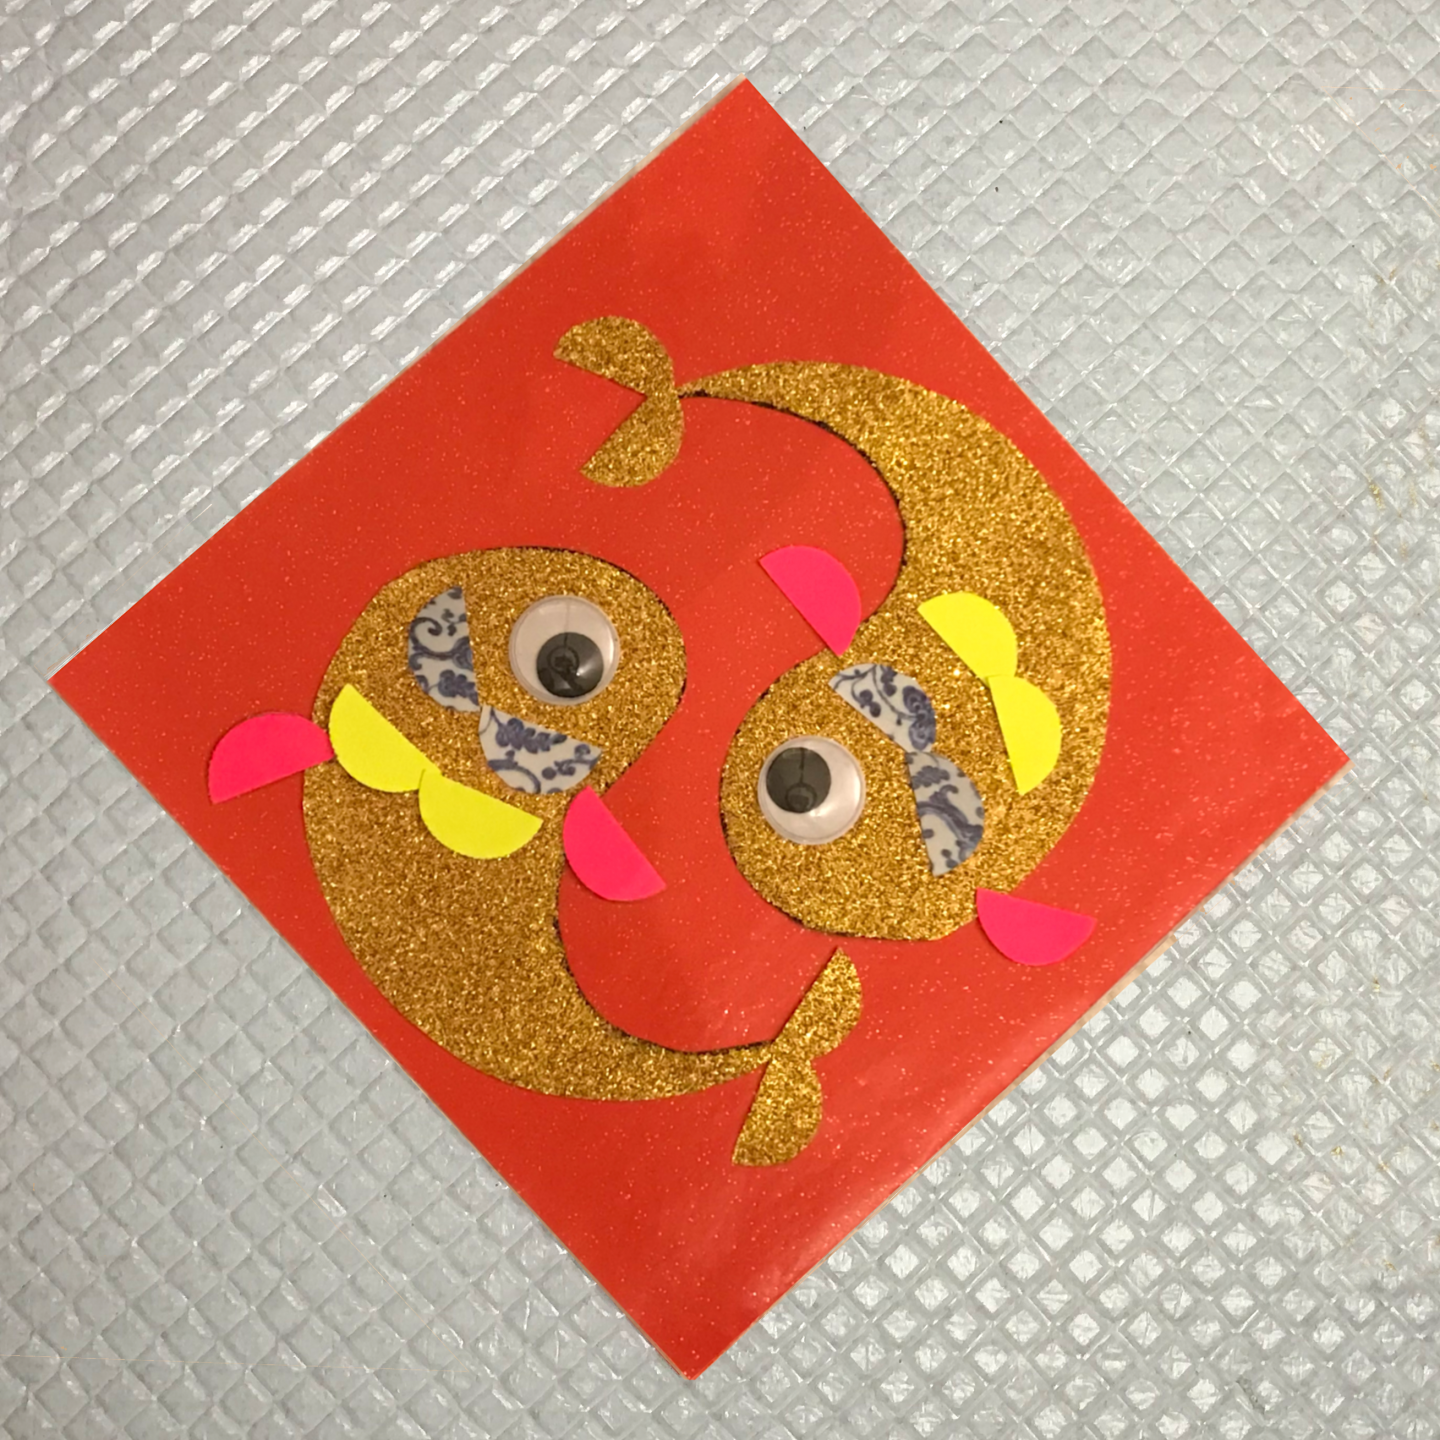 A piece of red square paper with two fish decorated on using cut out paper shapes.